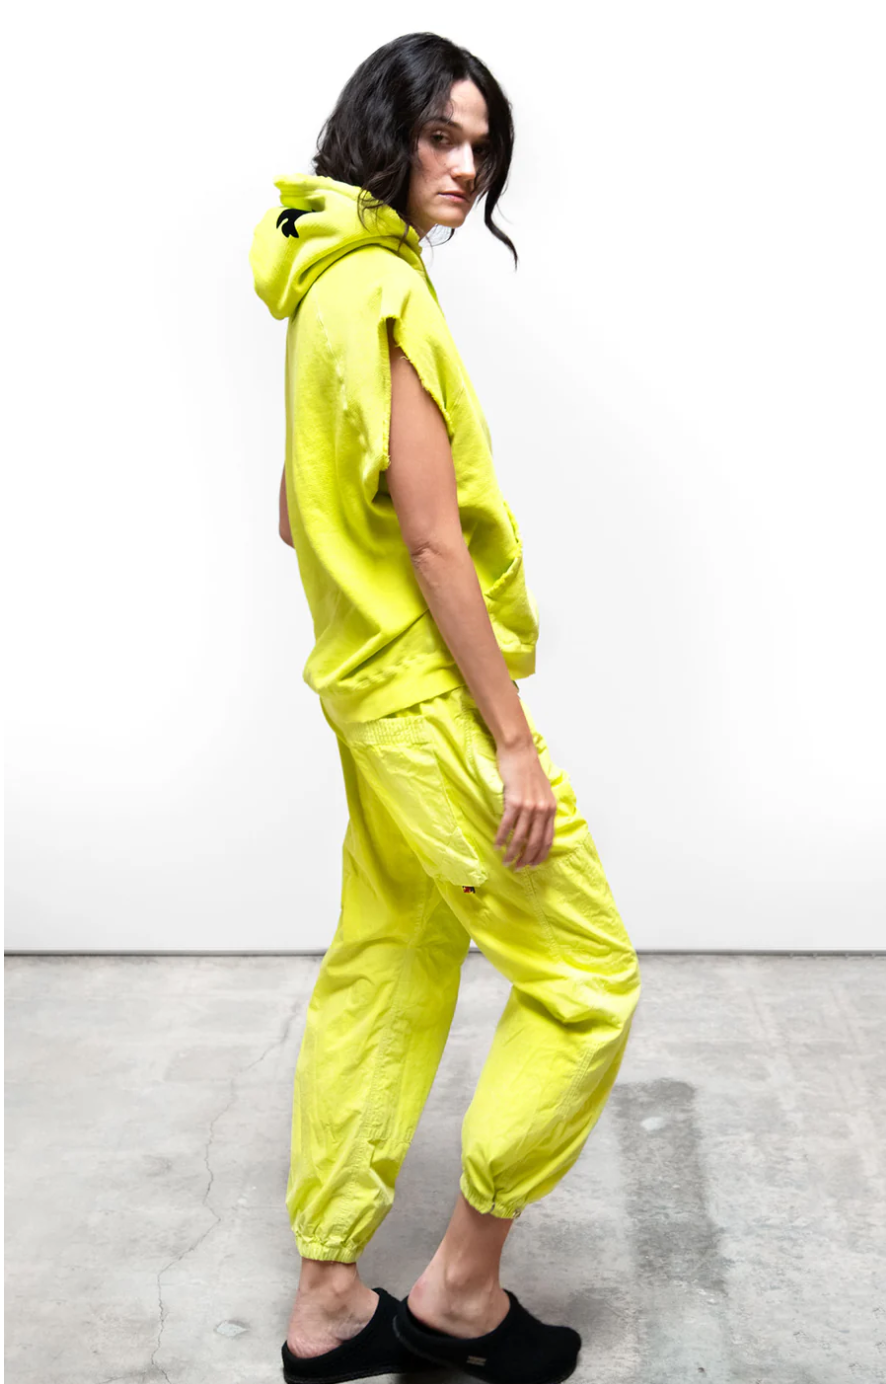 A woman stands sideways wearing a bright yellow unisex CUTOFF SUPERYUMM BIGGIE hoodie from Free City (sparrow, LLC) with a playful expression, against a plain white background. She has dark hair and simple black footwear.